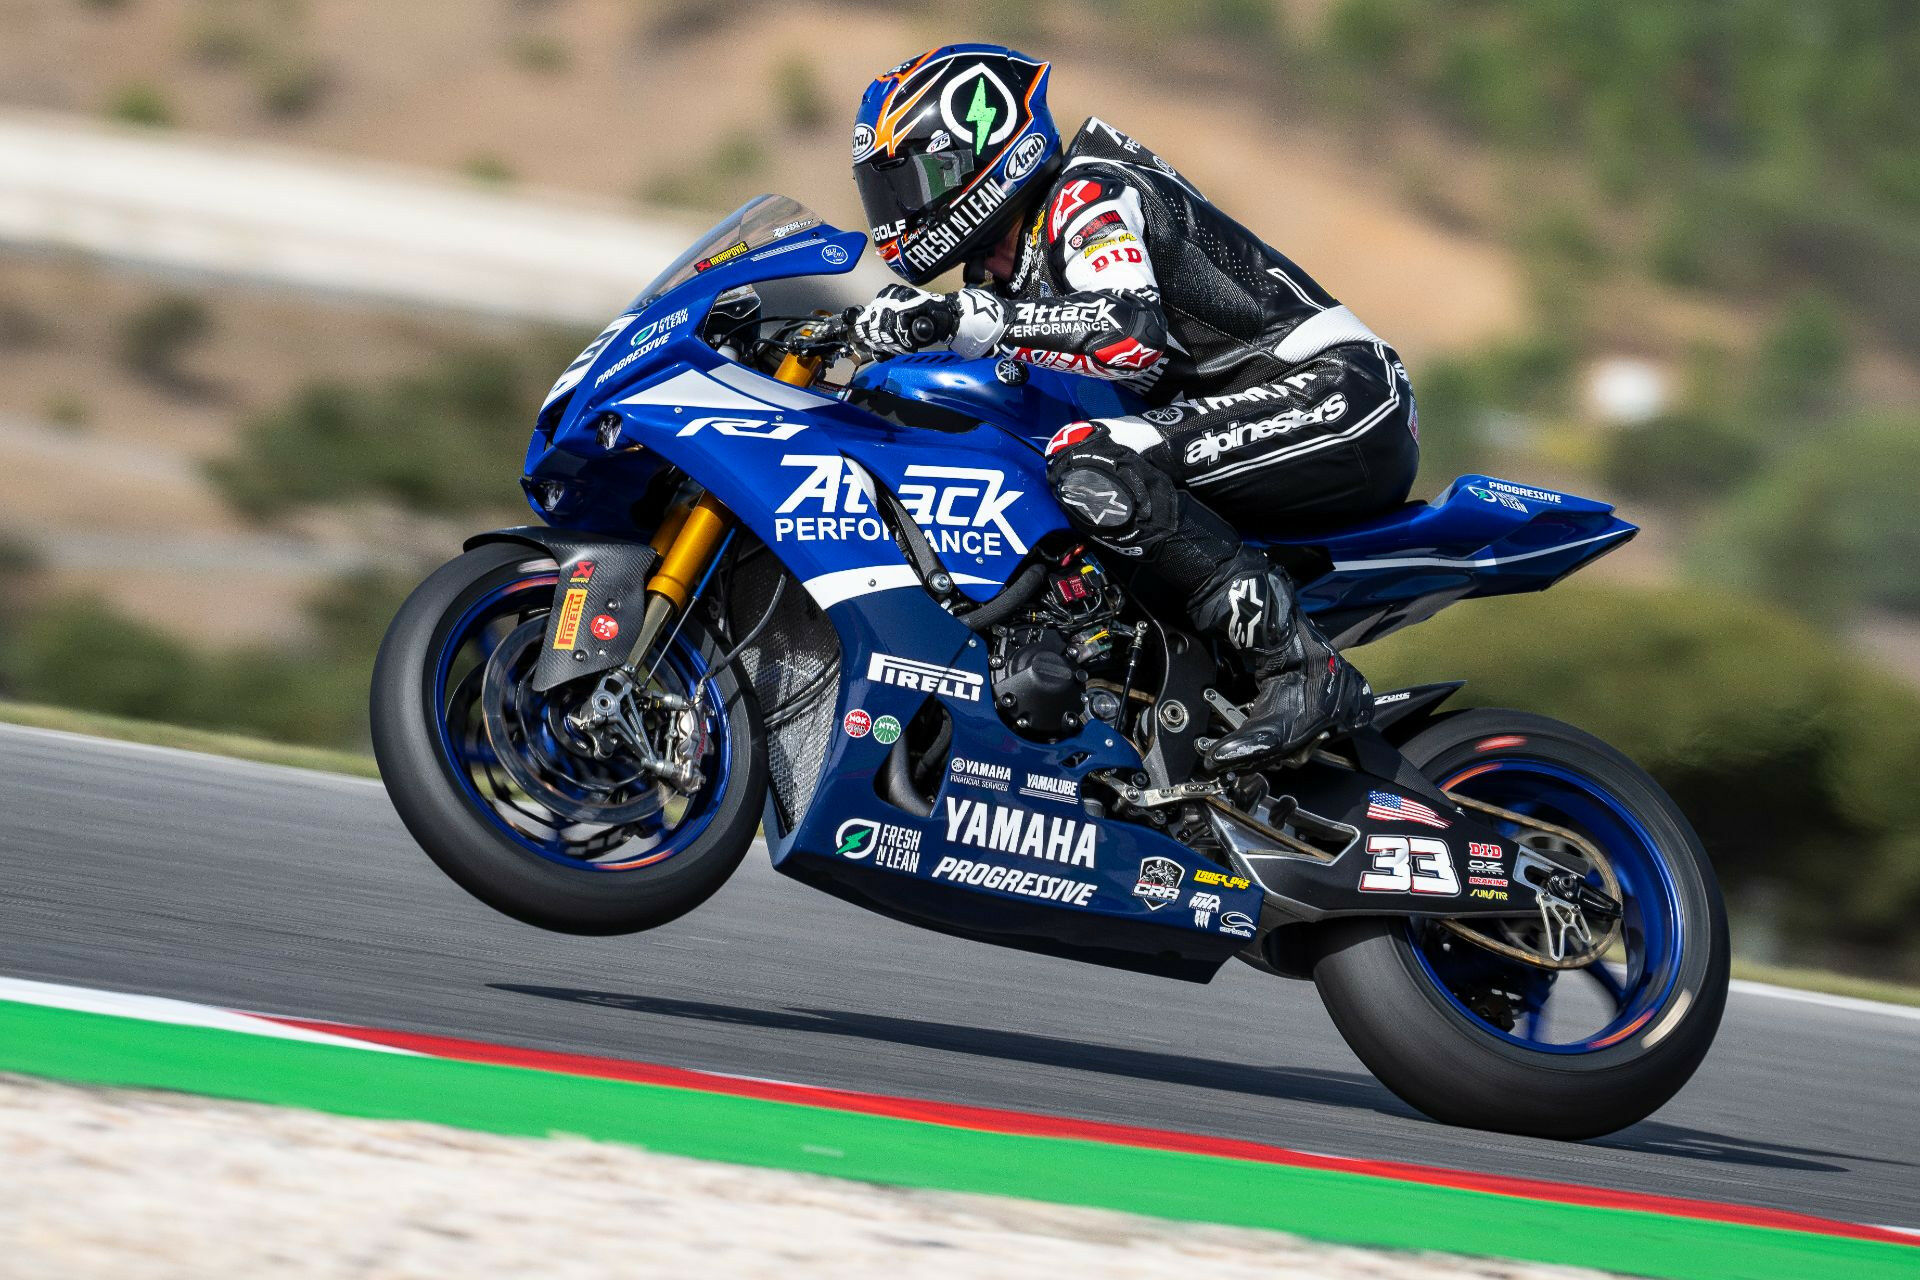 Two-time MotoAmerica Superbike Champion Jake Gagne (33) in action at Algarve International Circuit, in Portugal. Photo courtesy Yamaha.